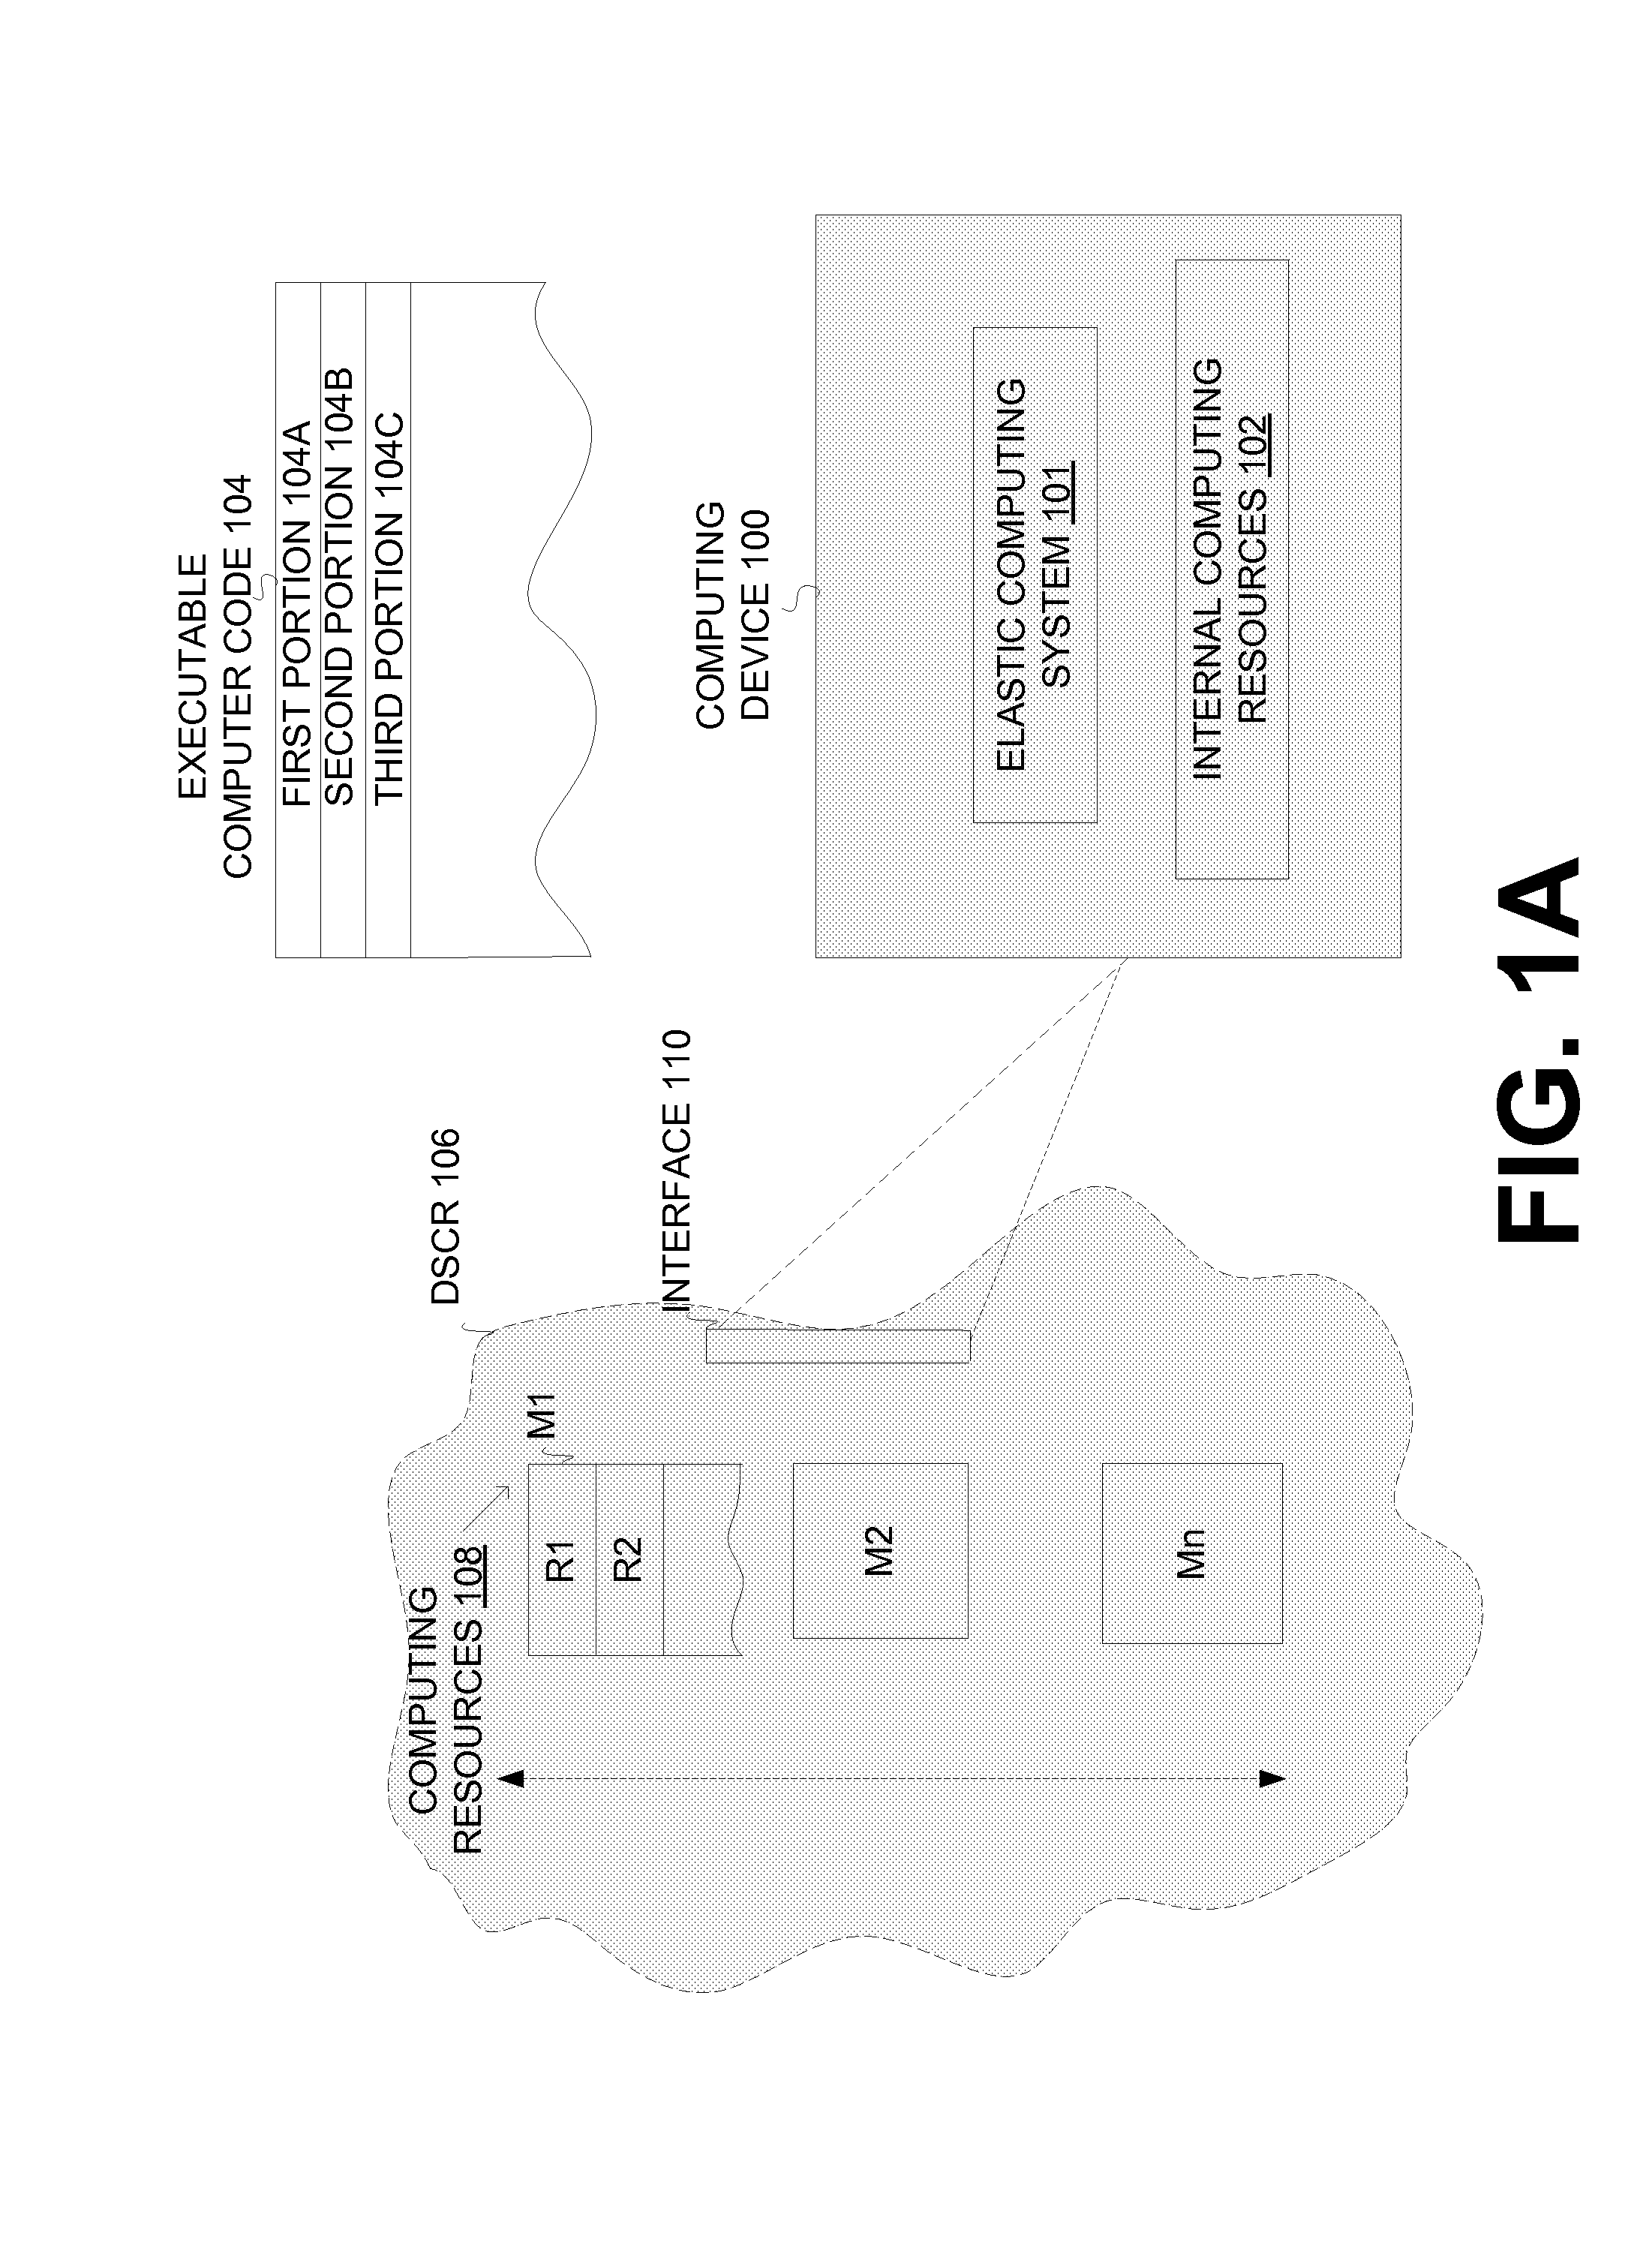 Execution allocation cost assessment for computing systems and environments including elastic computing systems and environments